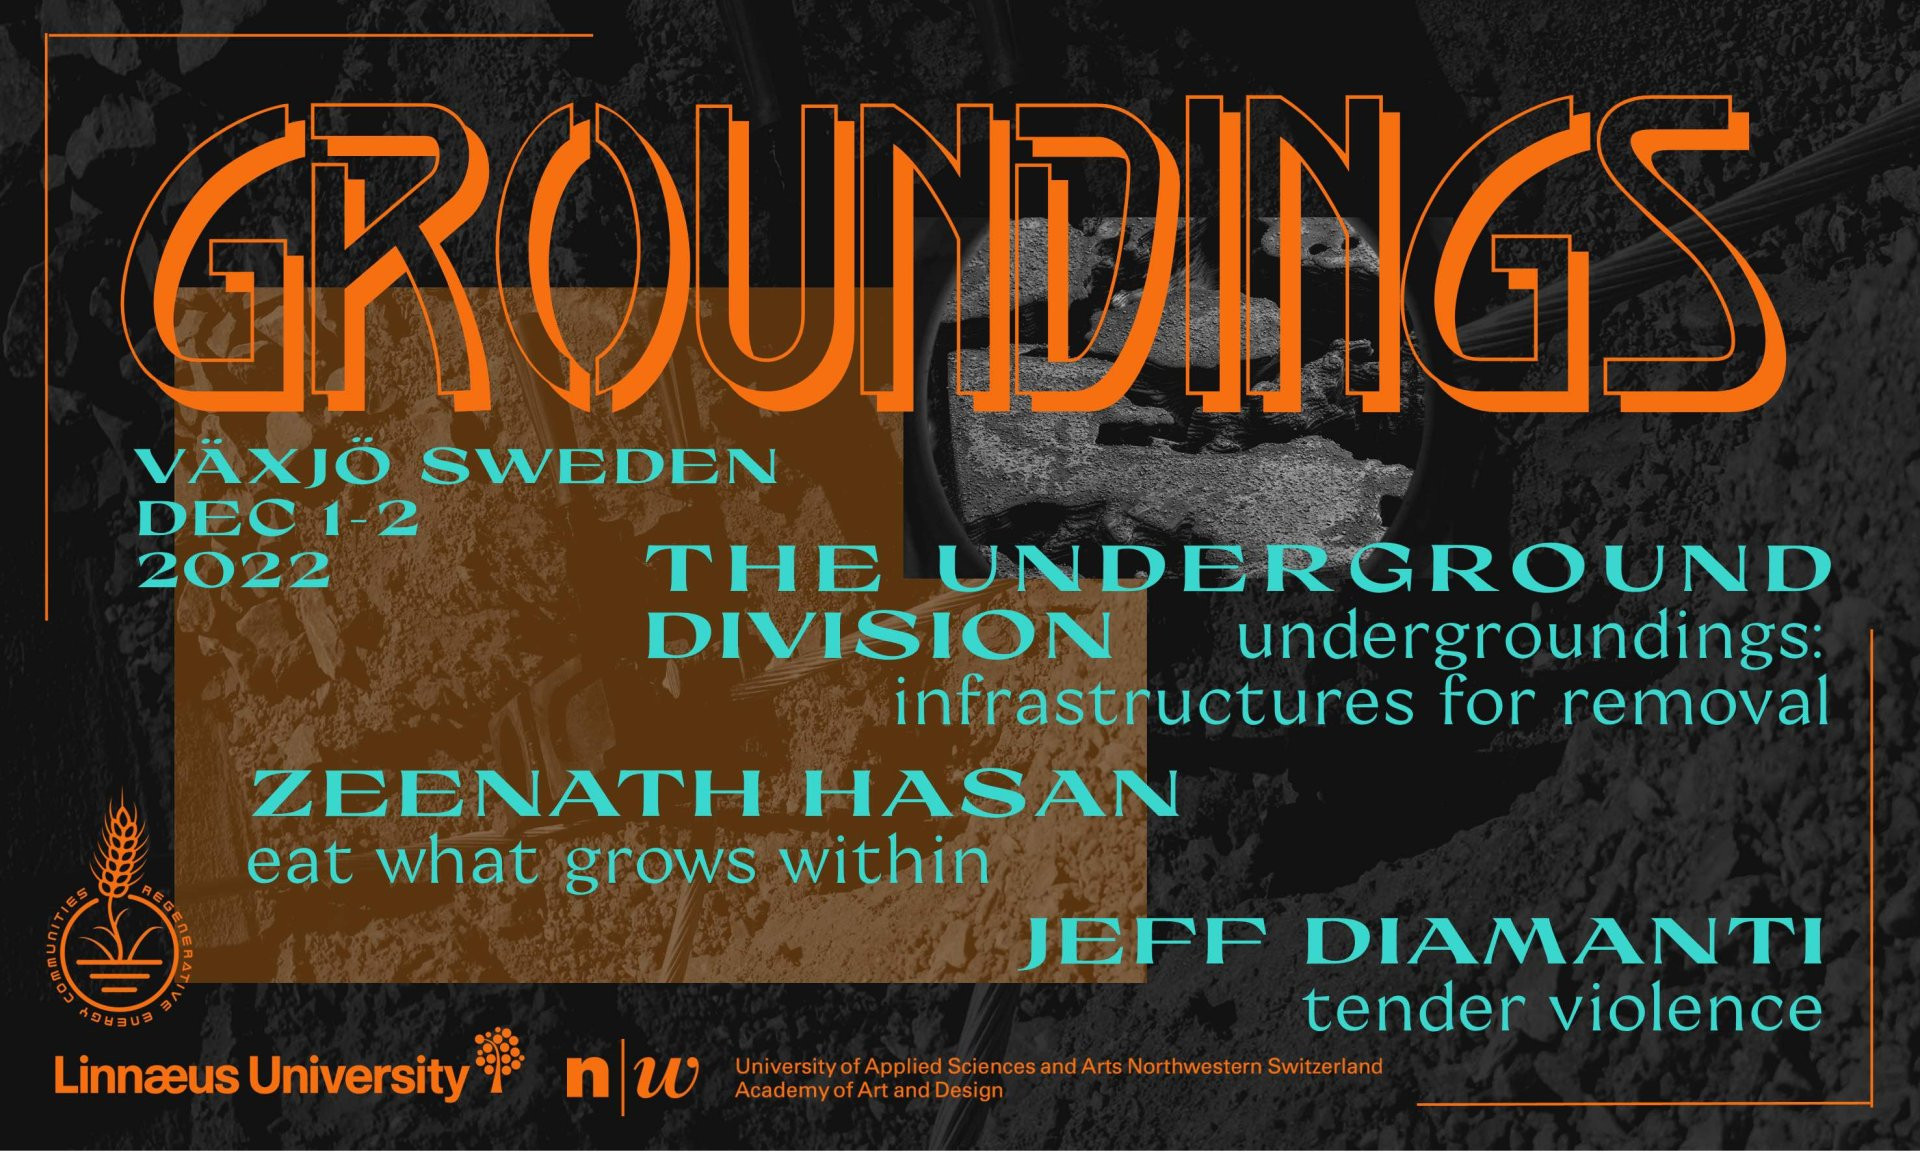 Poster for Groundings conference with large orange and artic blue text giving conference details against a background image of a large grounding rod in the soil